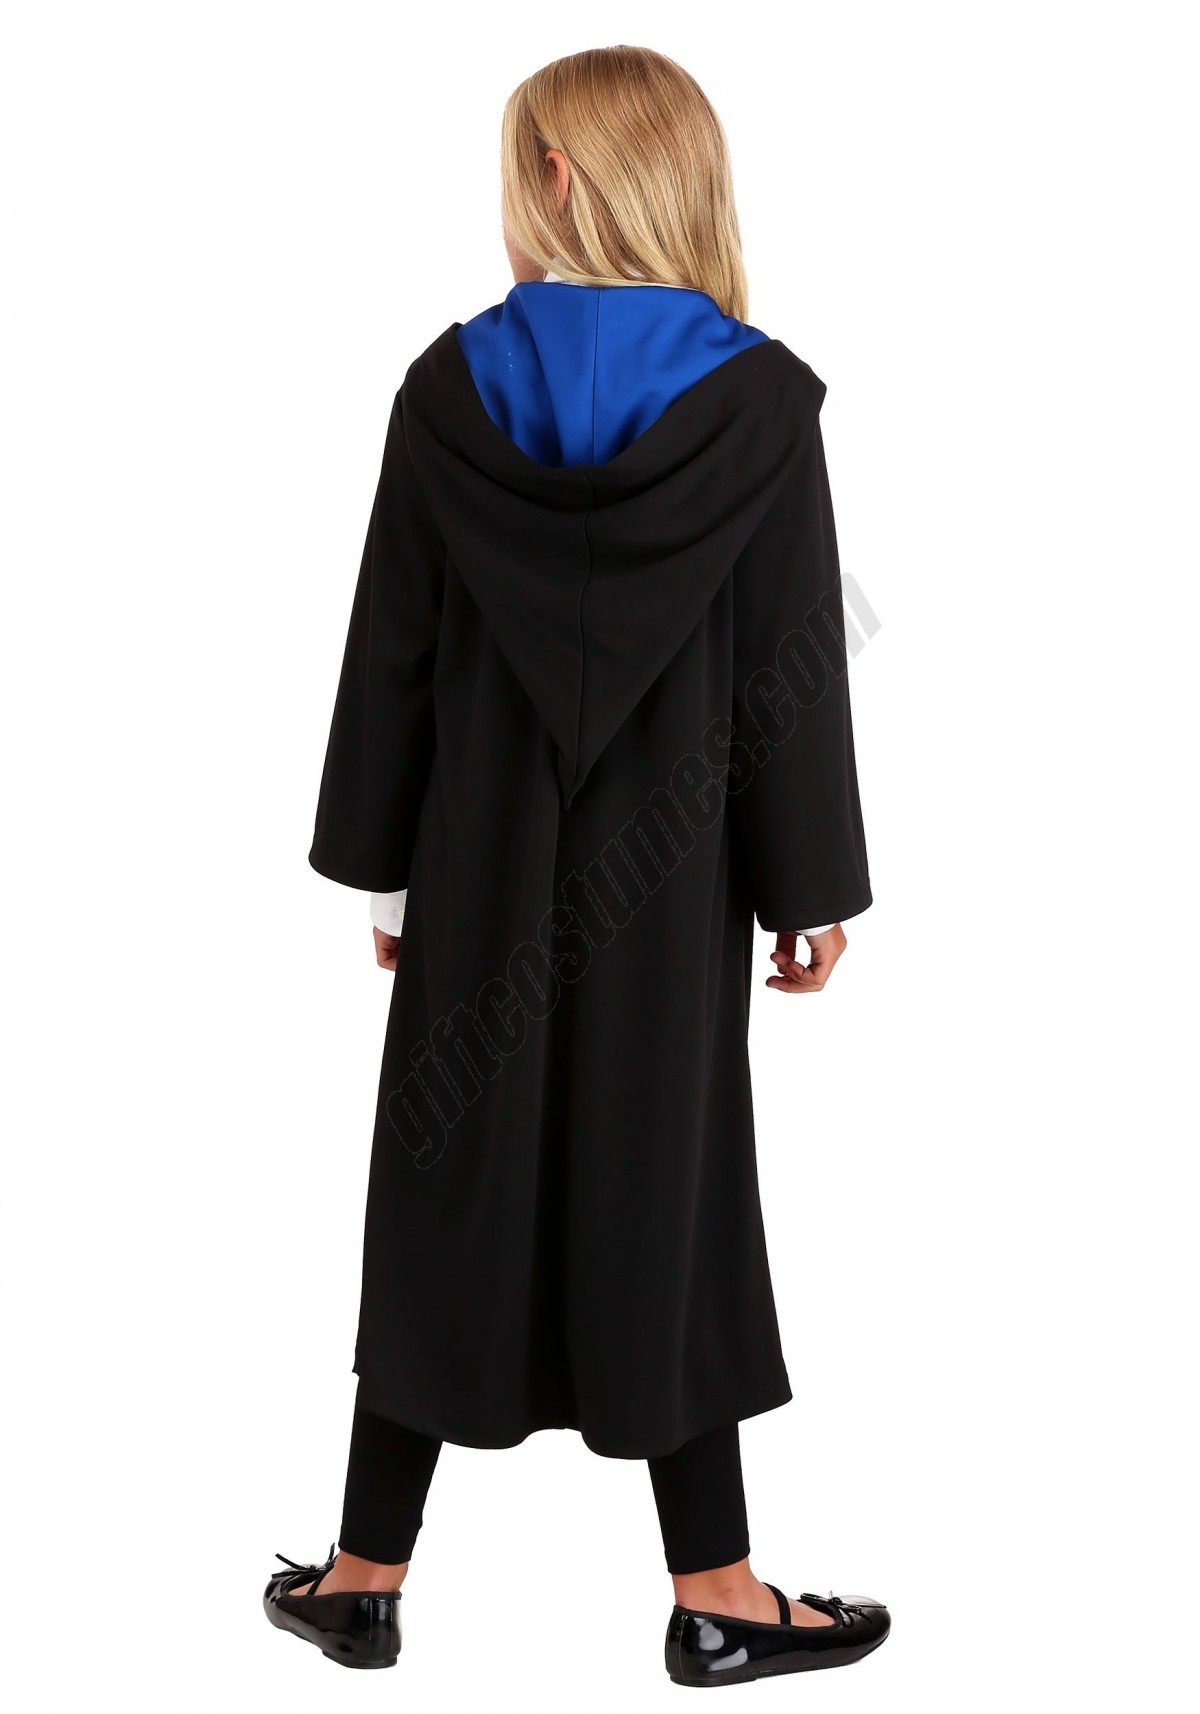 Kids Harry Potter Ravenclaw Robe Costume Promotions - -2